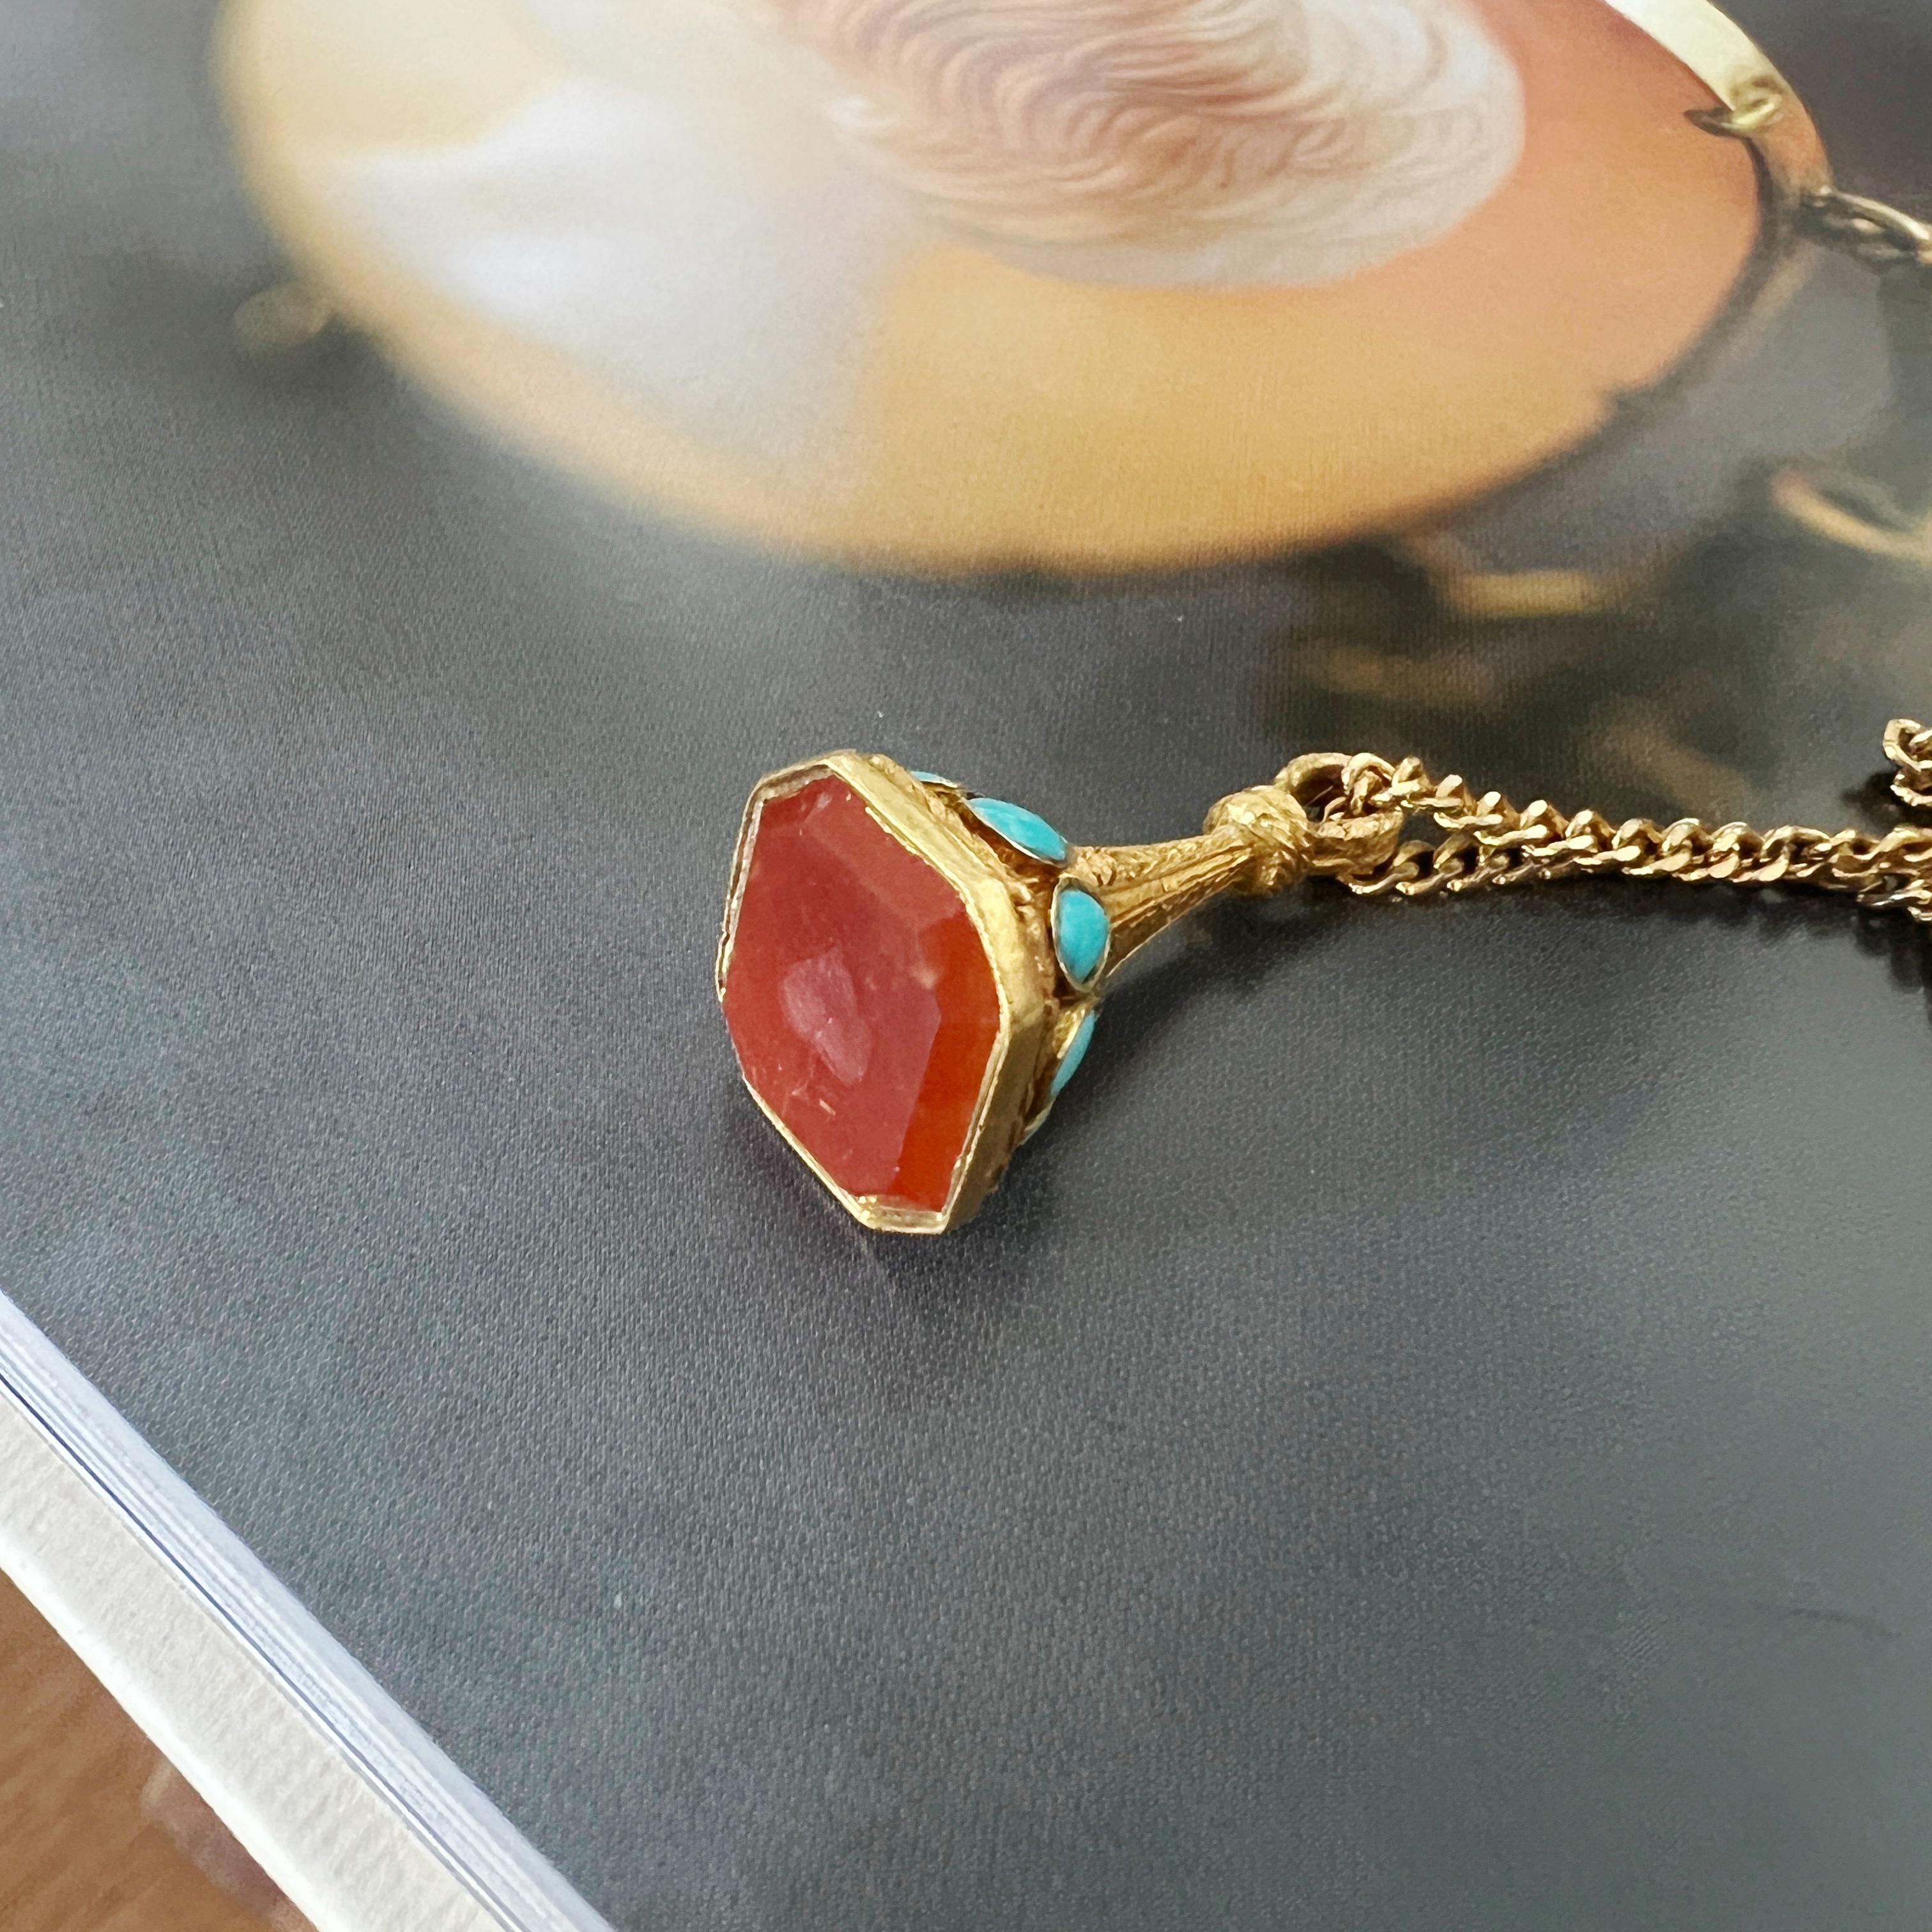 Women's or Men's Antique 18K gold turquoise carnelian seal fob pendant “as free as a leaf”